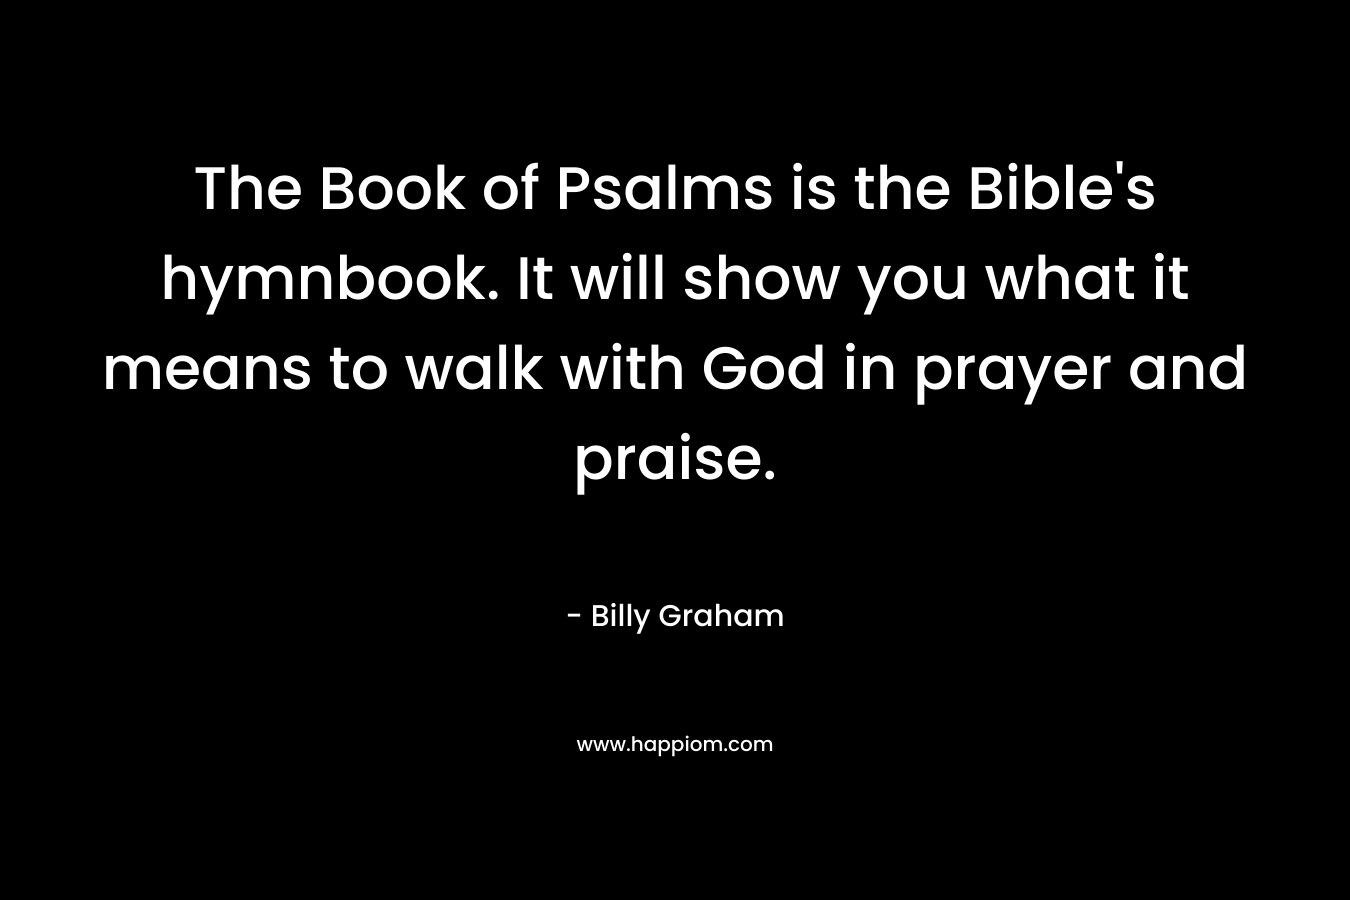 The Book of Psalms is the Bible's hymnbook. It will show you what it means to walk with God in prayer and praise.